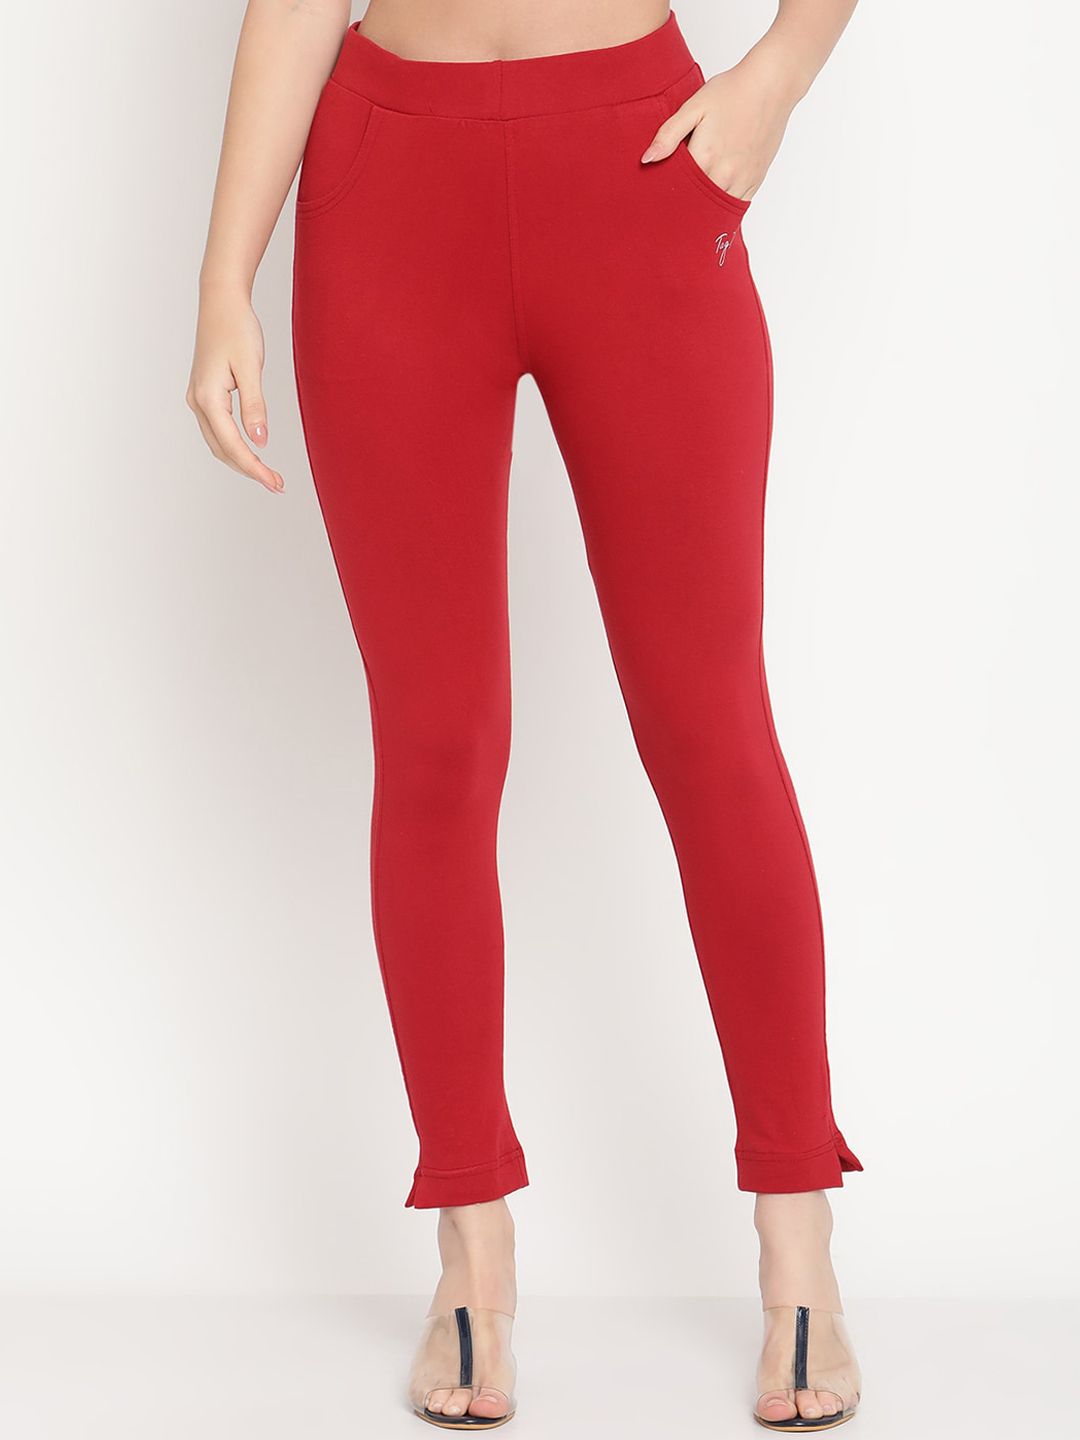 TAG 7 Women Maroon Solid Ankle-Length Leggings Price in India